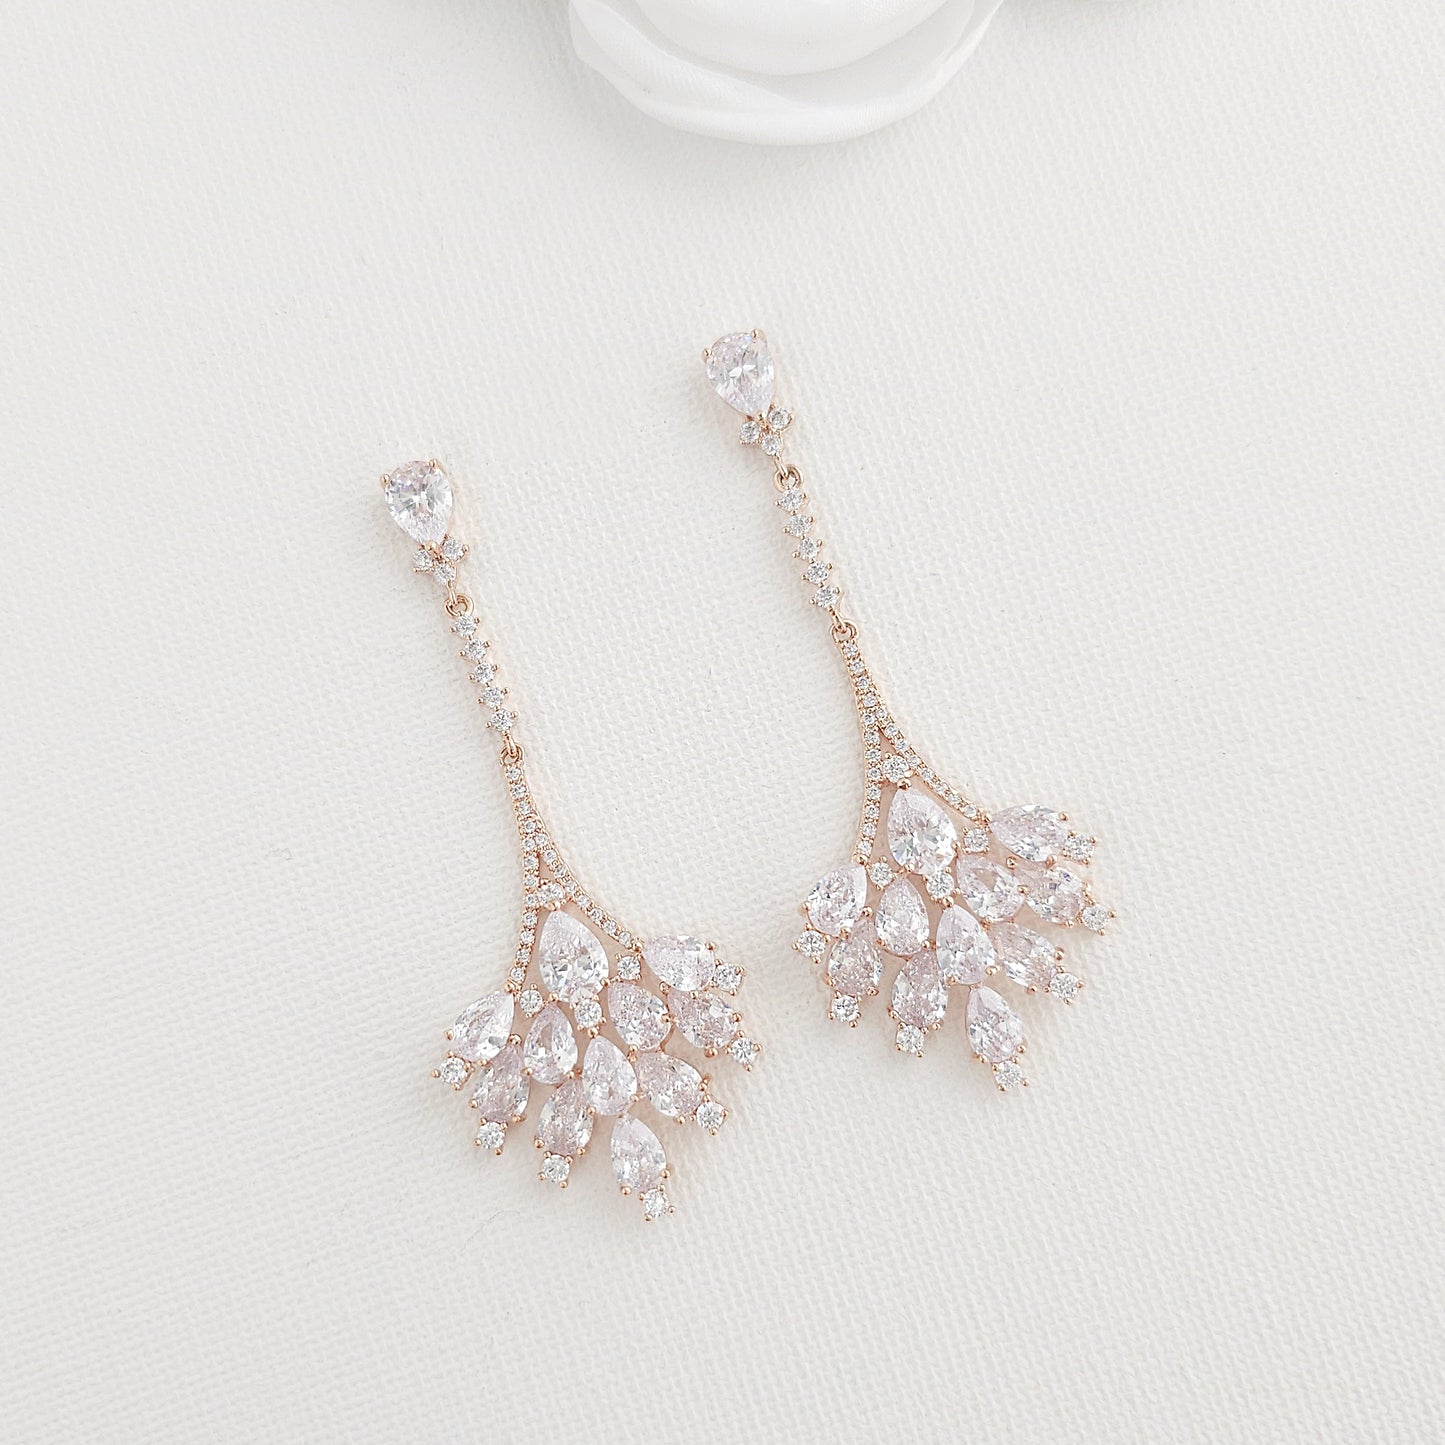 Dangling Chandelier Earrings for Wedding and Special Occasions-Yana